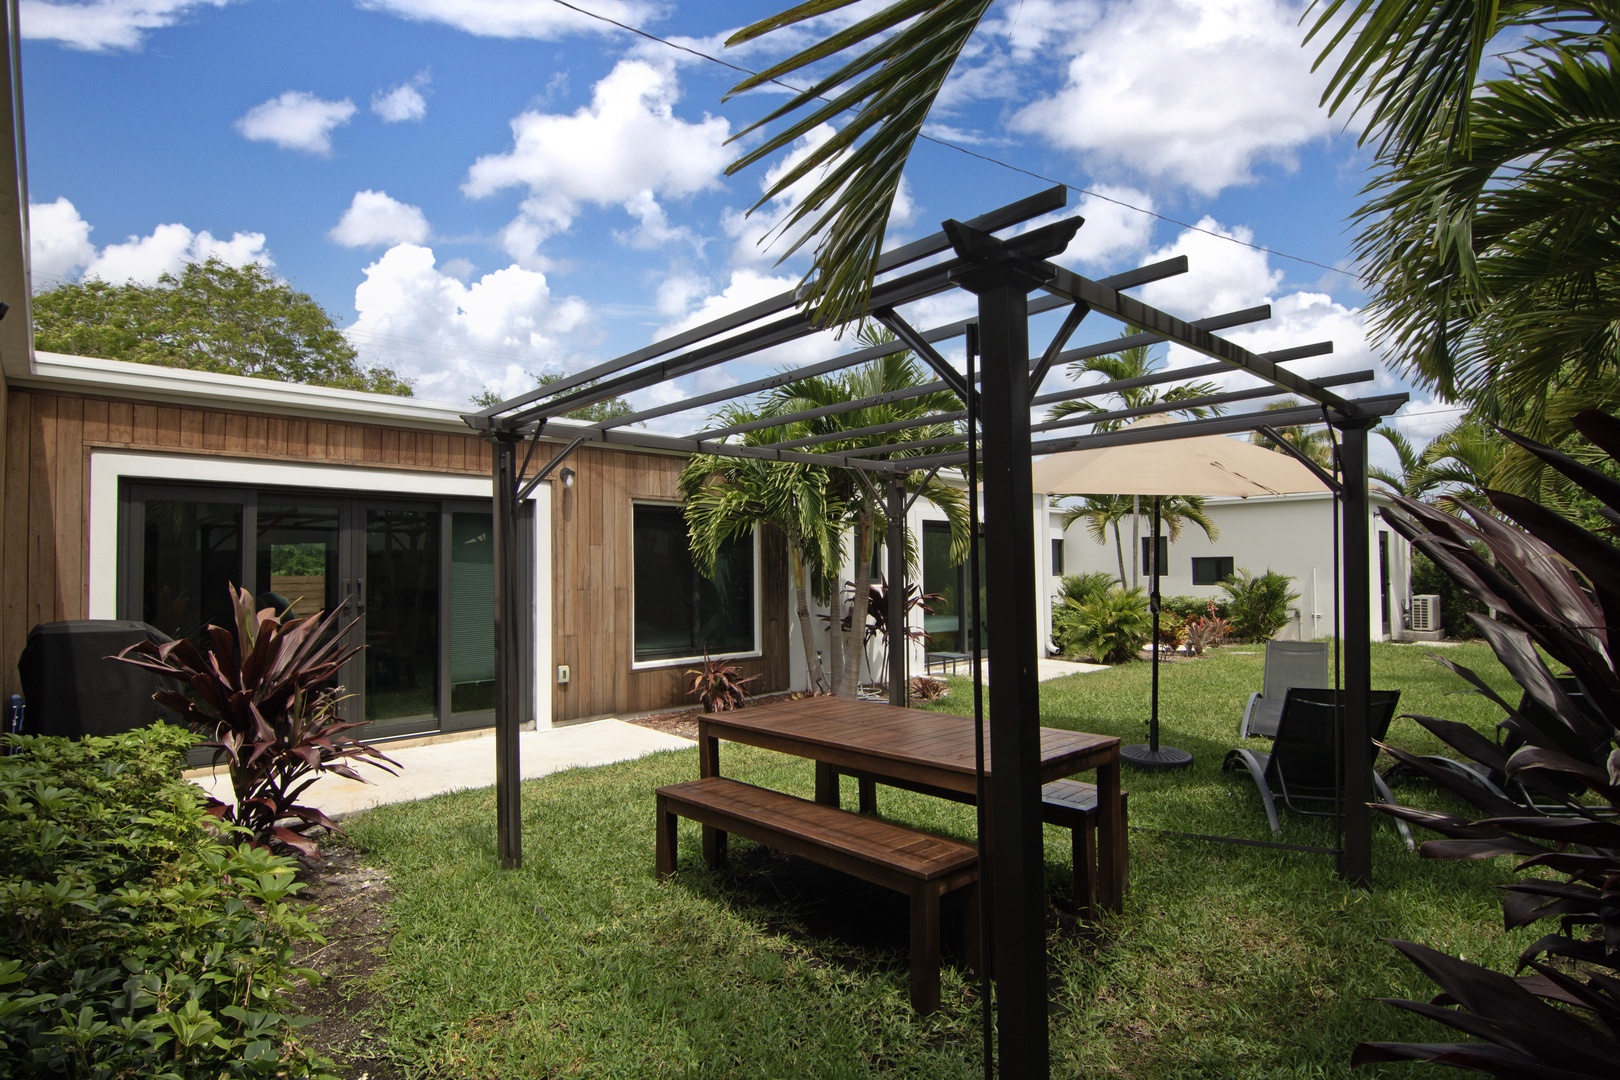 Relish in the tranquility of our secluded backyard retreat